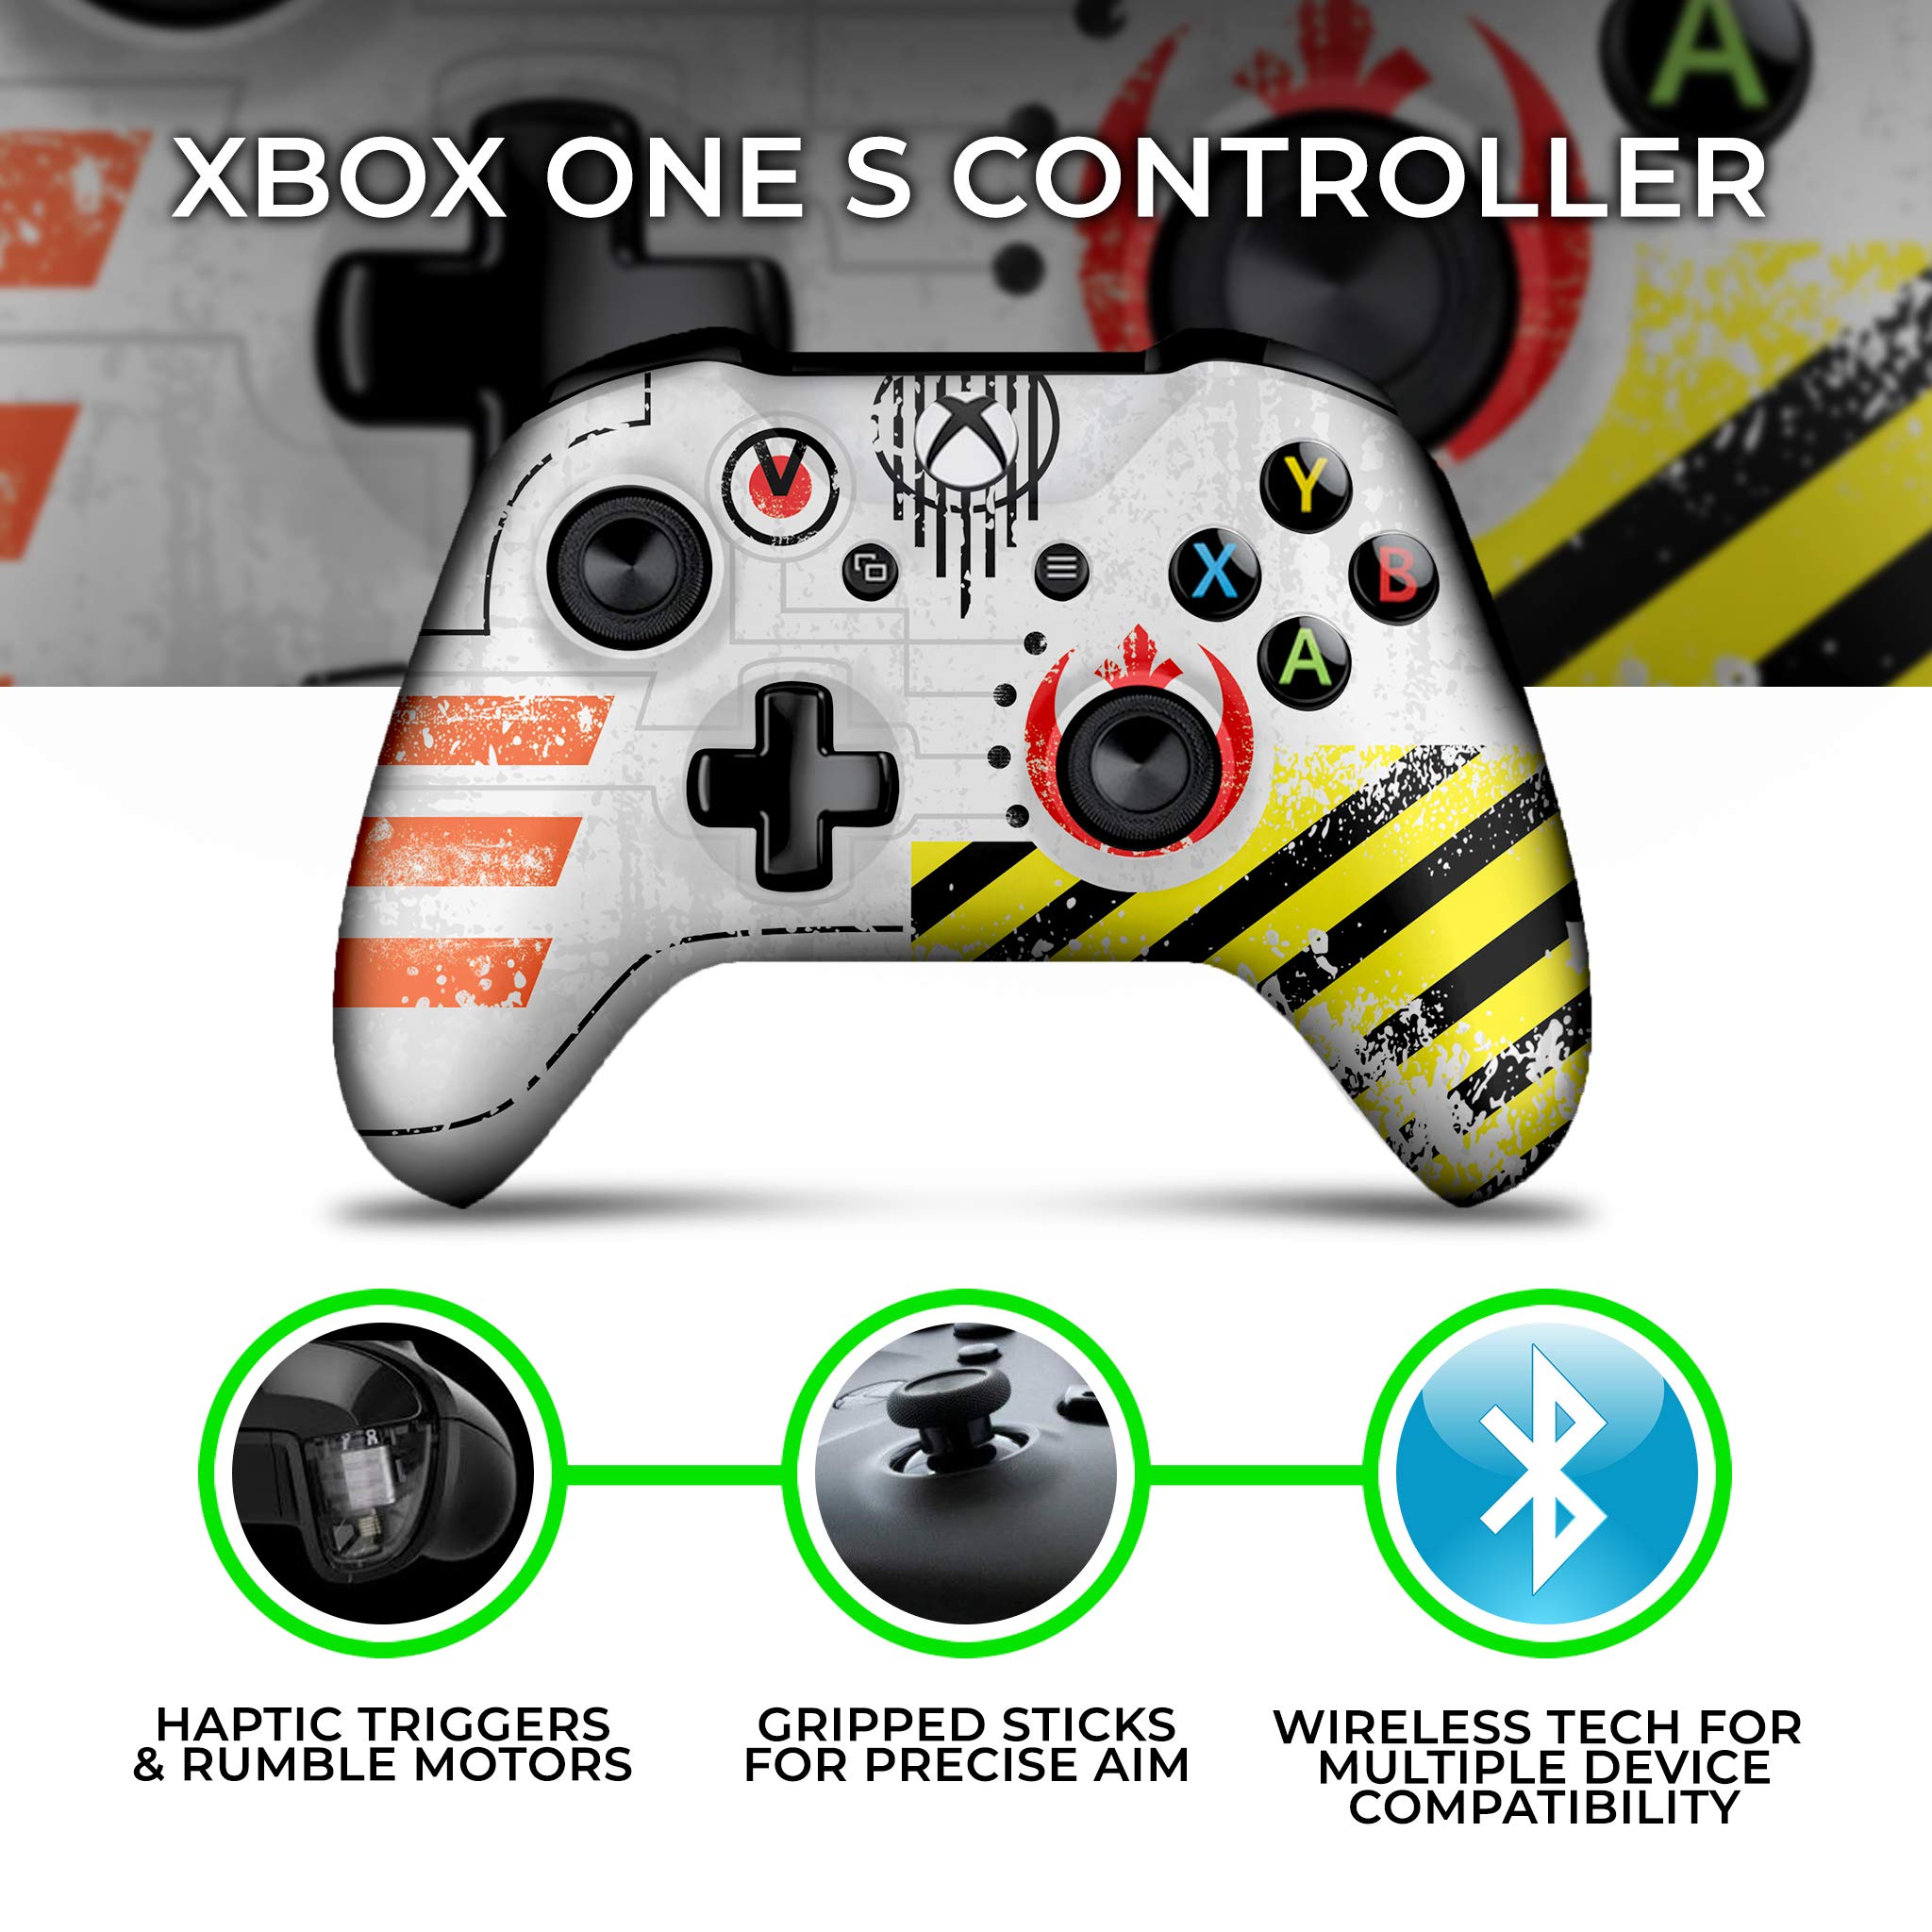 Dream Controller Original Modded Xbox One Controller - Controller Works with Xbox One S / One X / Windows 10 PC - Rapid Fire and Aim Assist Xbox One Controller with Included Mods Manual - image 2 of 7